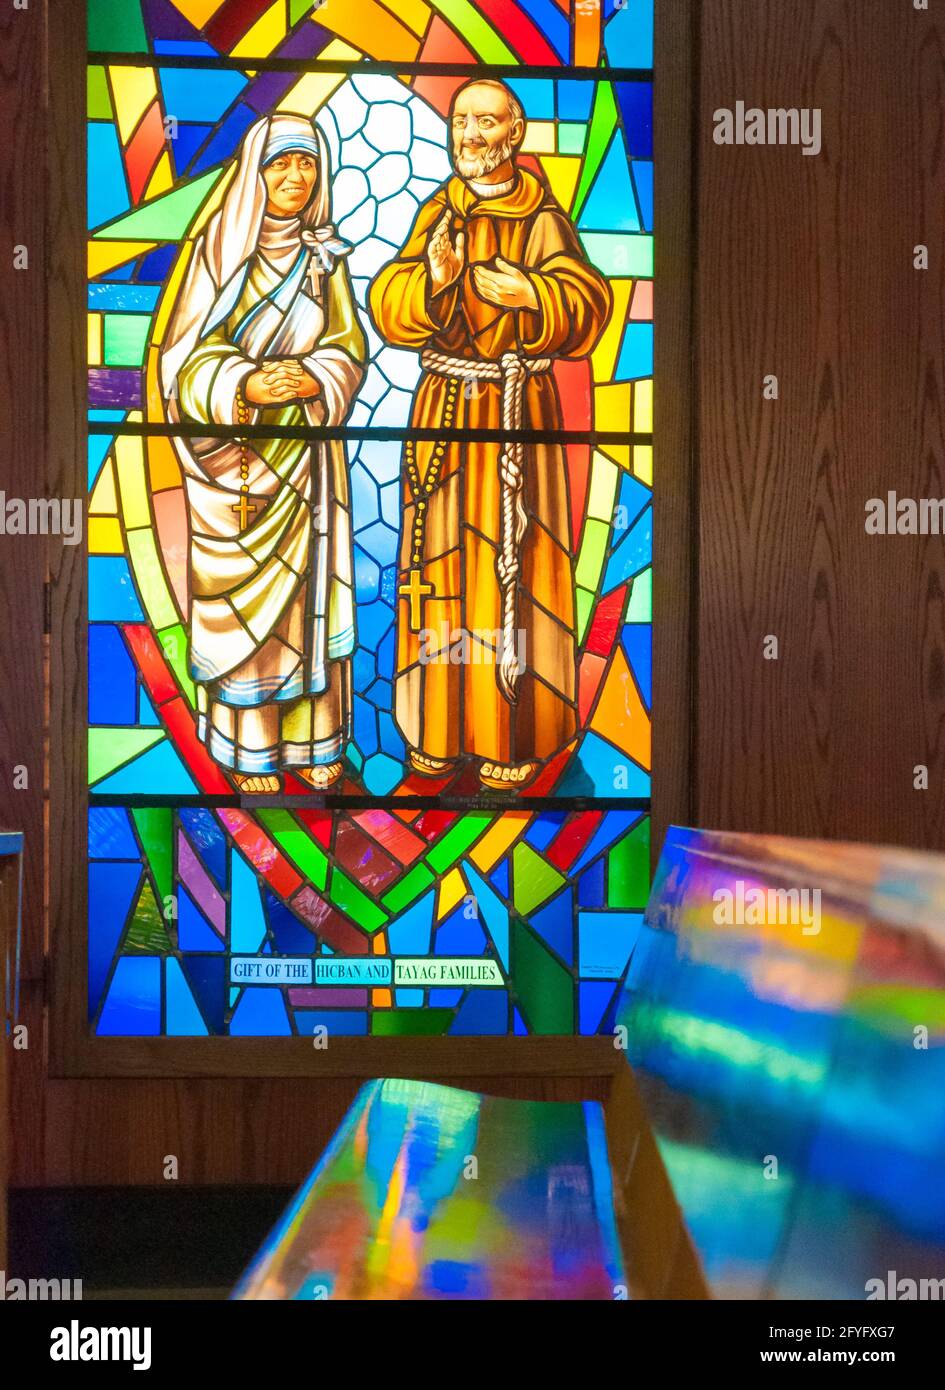 Catholic image in stained glass.  Joseph and the Virgin Mary are surrounded by the colorful glass at the Annunciation Catholic Church in Toronto.  The col Stock Photo